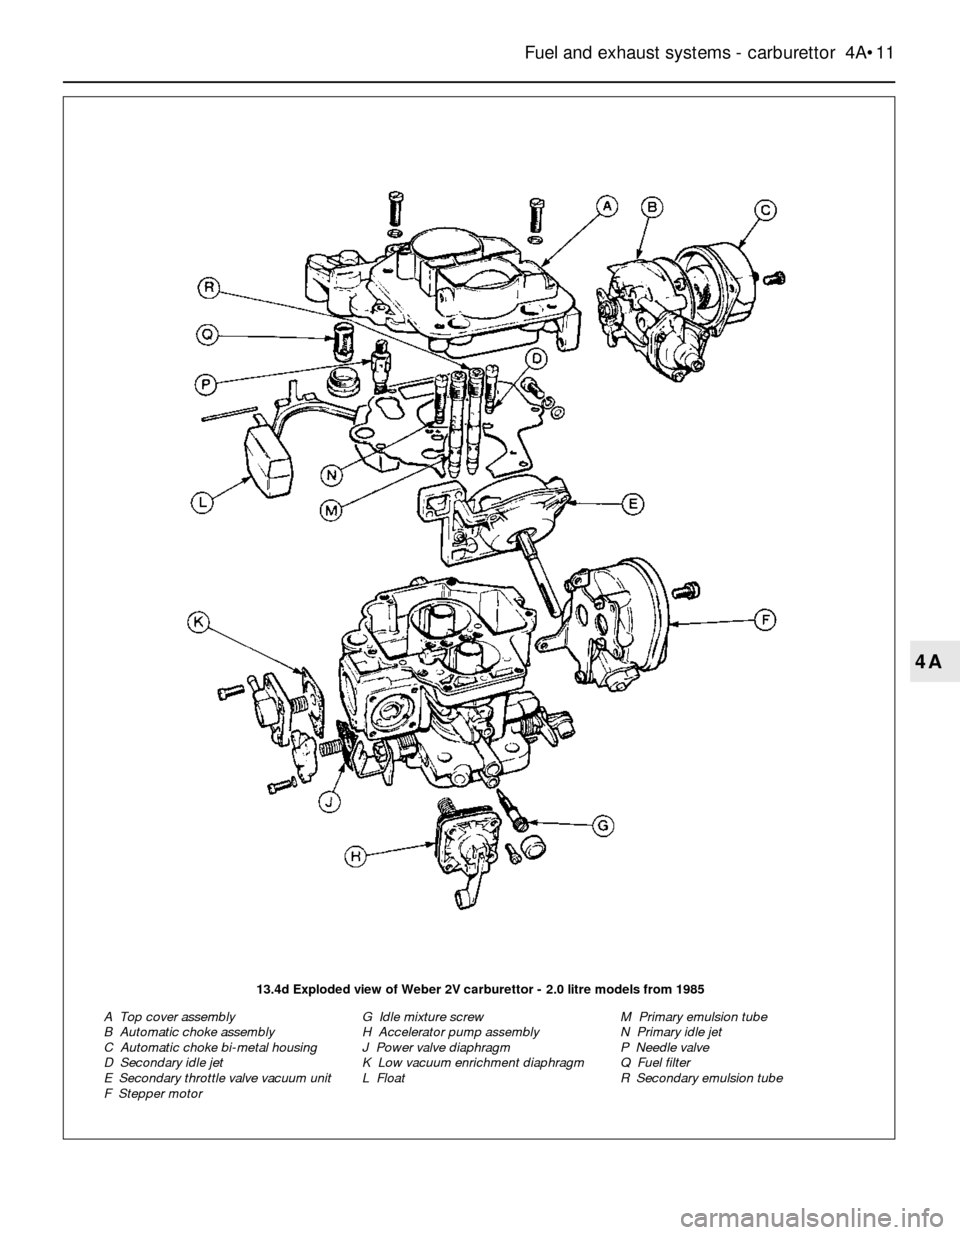 FORD SIERRA 1988 2.G Fuel And Exhaust Systems Carburettor User Guide Fuel and exhaust systems - carburettor  4A•11
4A
13.4d Exploded view of Weber 2V carburettor - 2.0 litre models from 1985
A  Top cover assembly
B  Automatic choke assembly
C  Automatic choke bi-meta